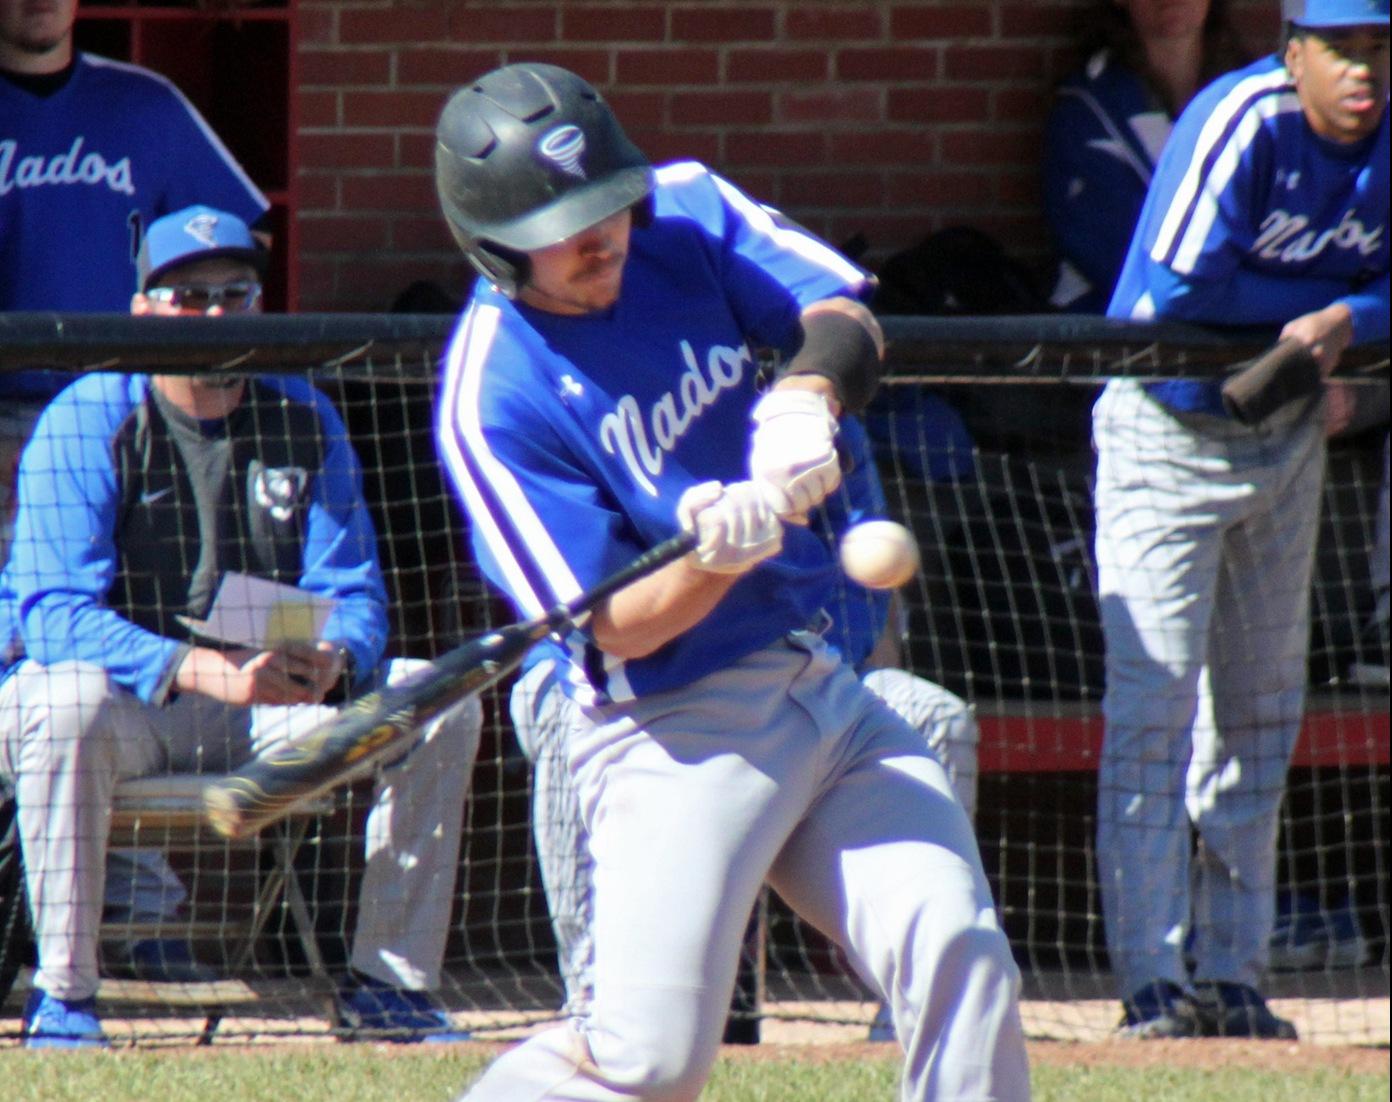 Christian Ezzell put together a career day in BC's second win of 2020, going 4-for-5 at the plate with five RBI's and a two-run homer (Photo courtesy of Judy Victory).